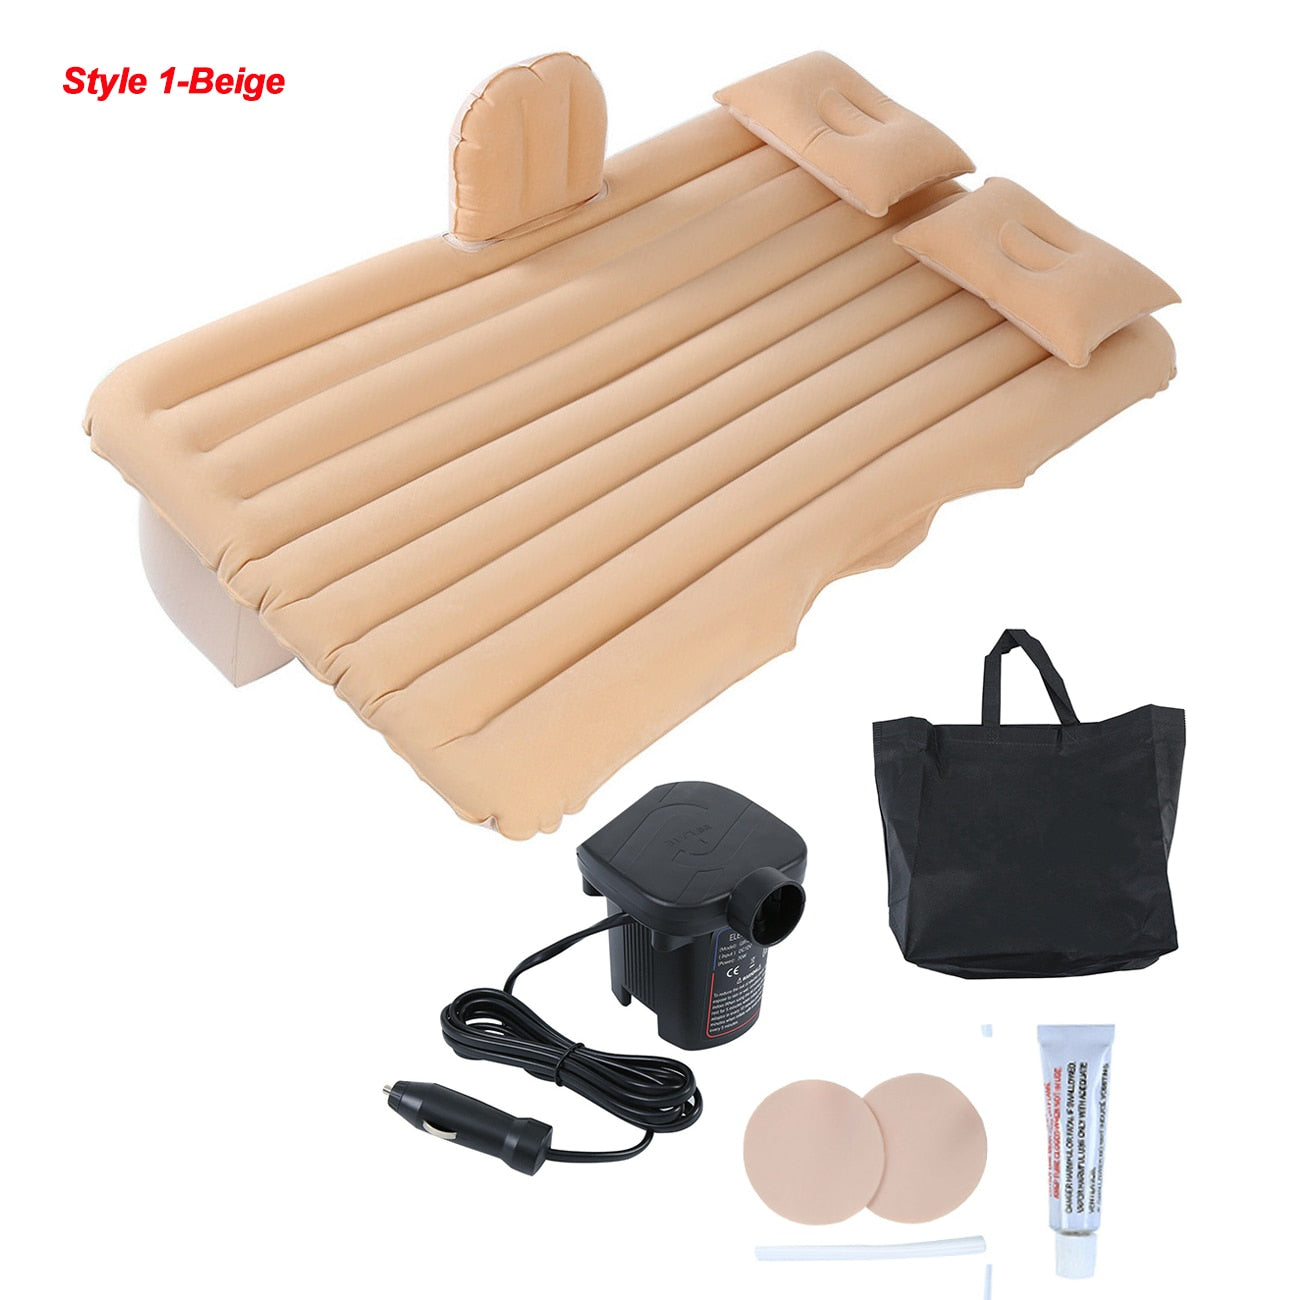 Samger Car Inflatable Bed